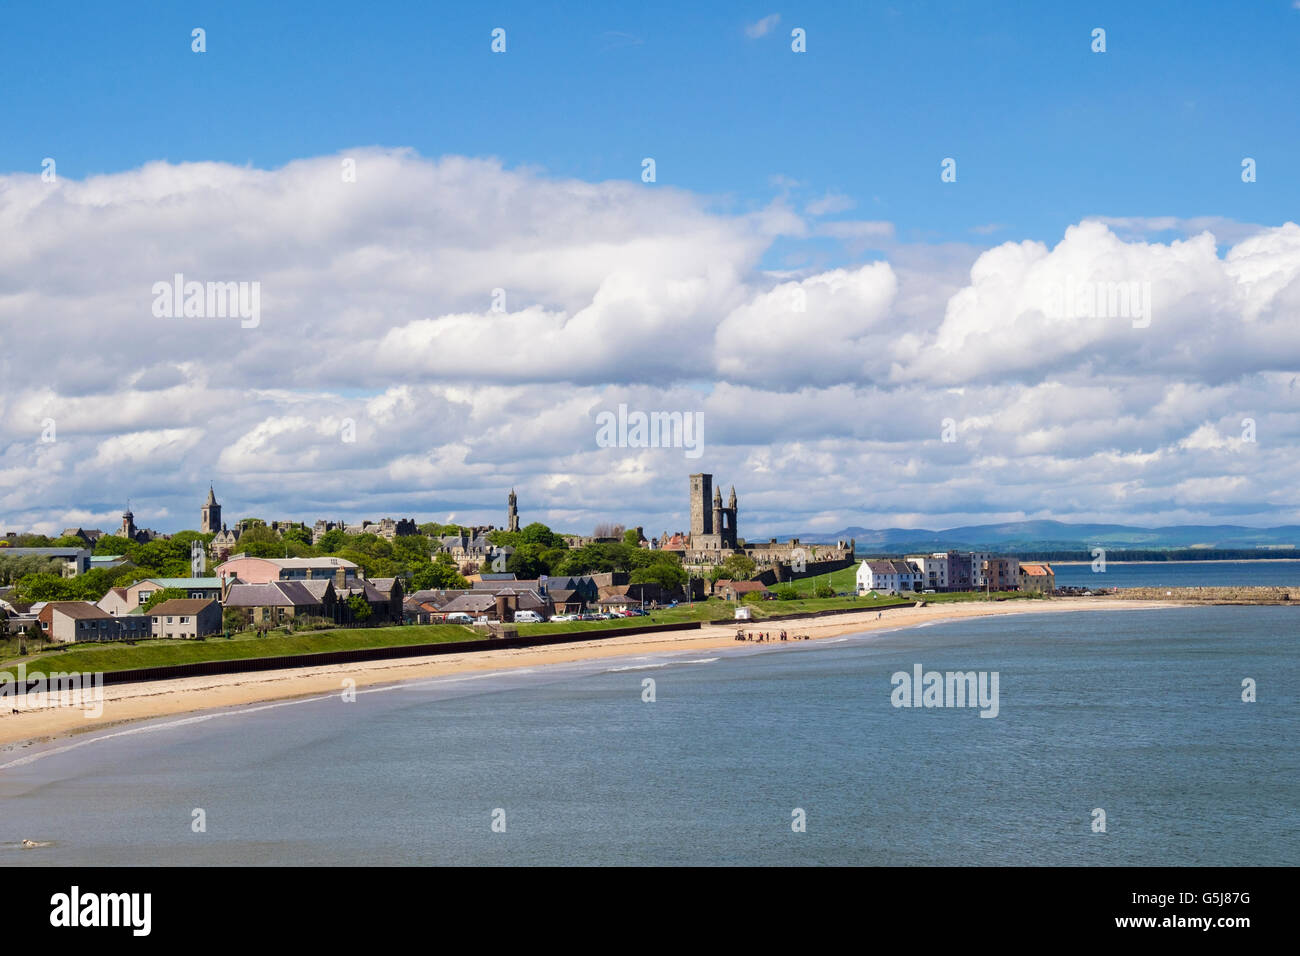 View to East Sands beach and town skyline on North Sea coast from Fife Coastal Path in summer. St Andrews Fife Scotland UK Stock Photo